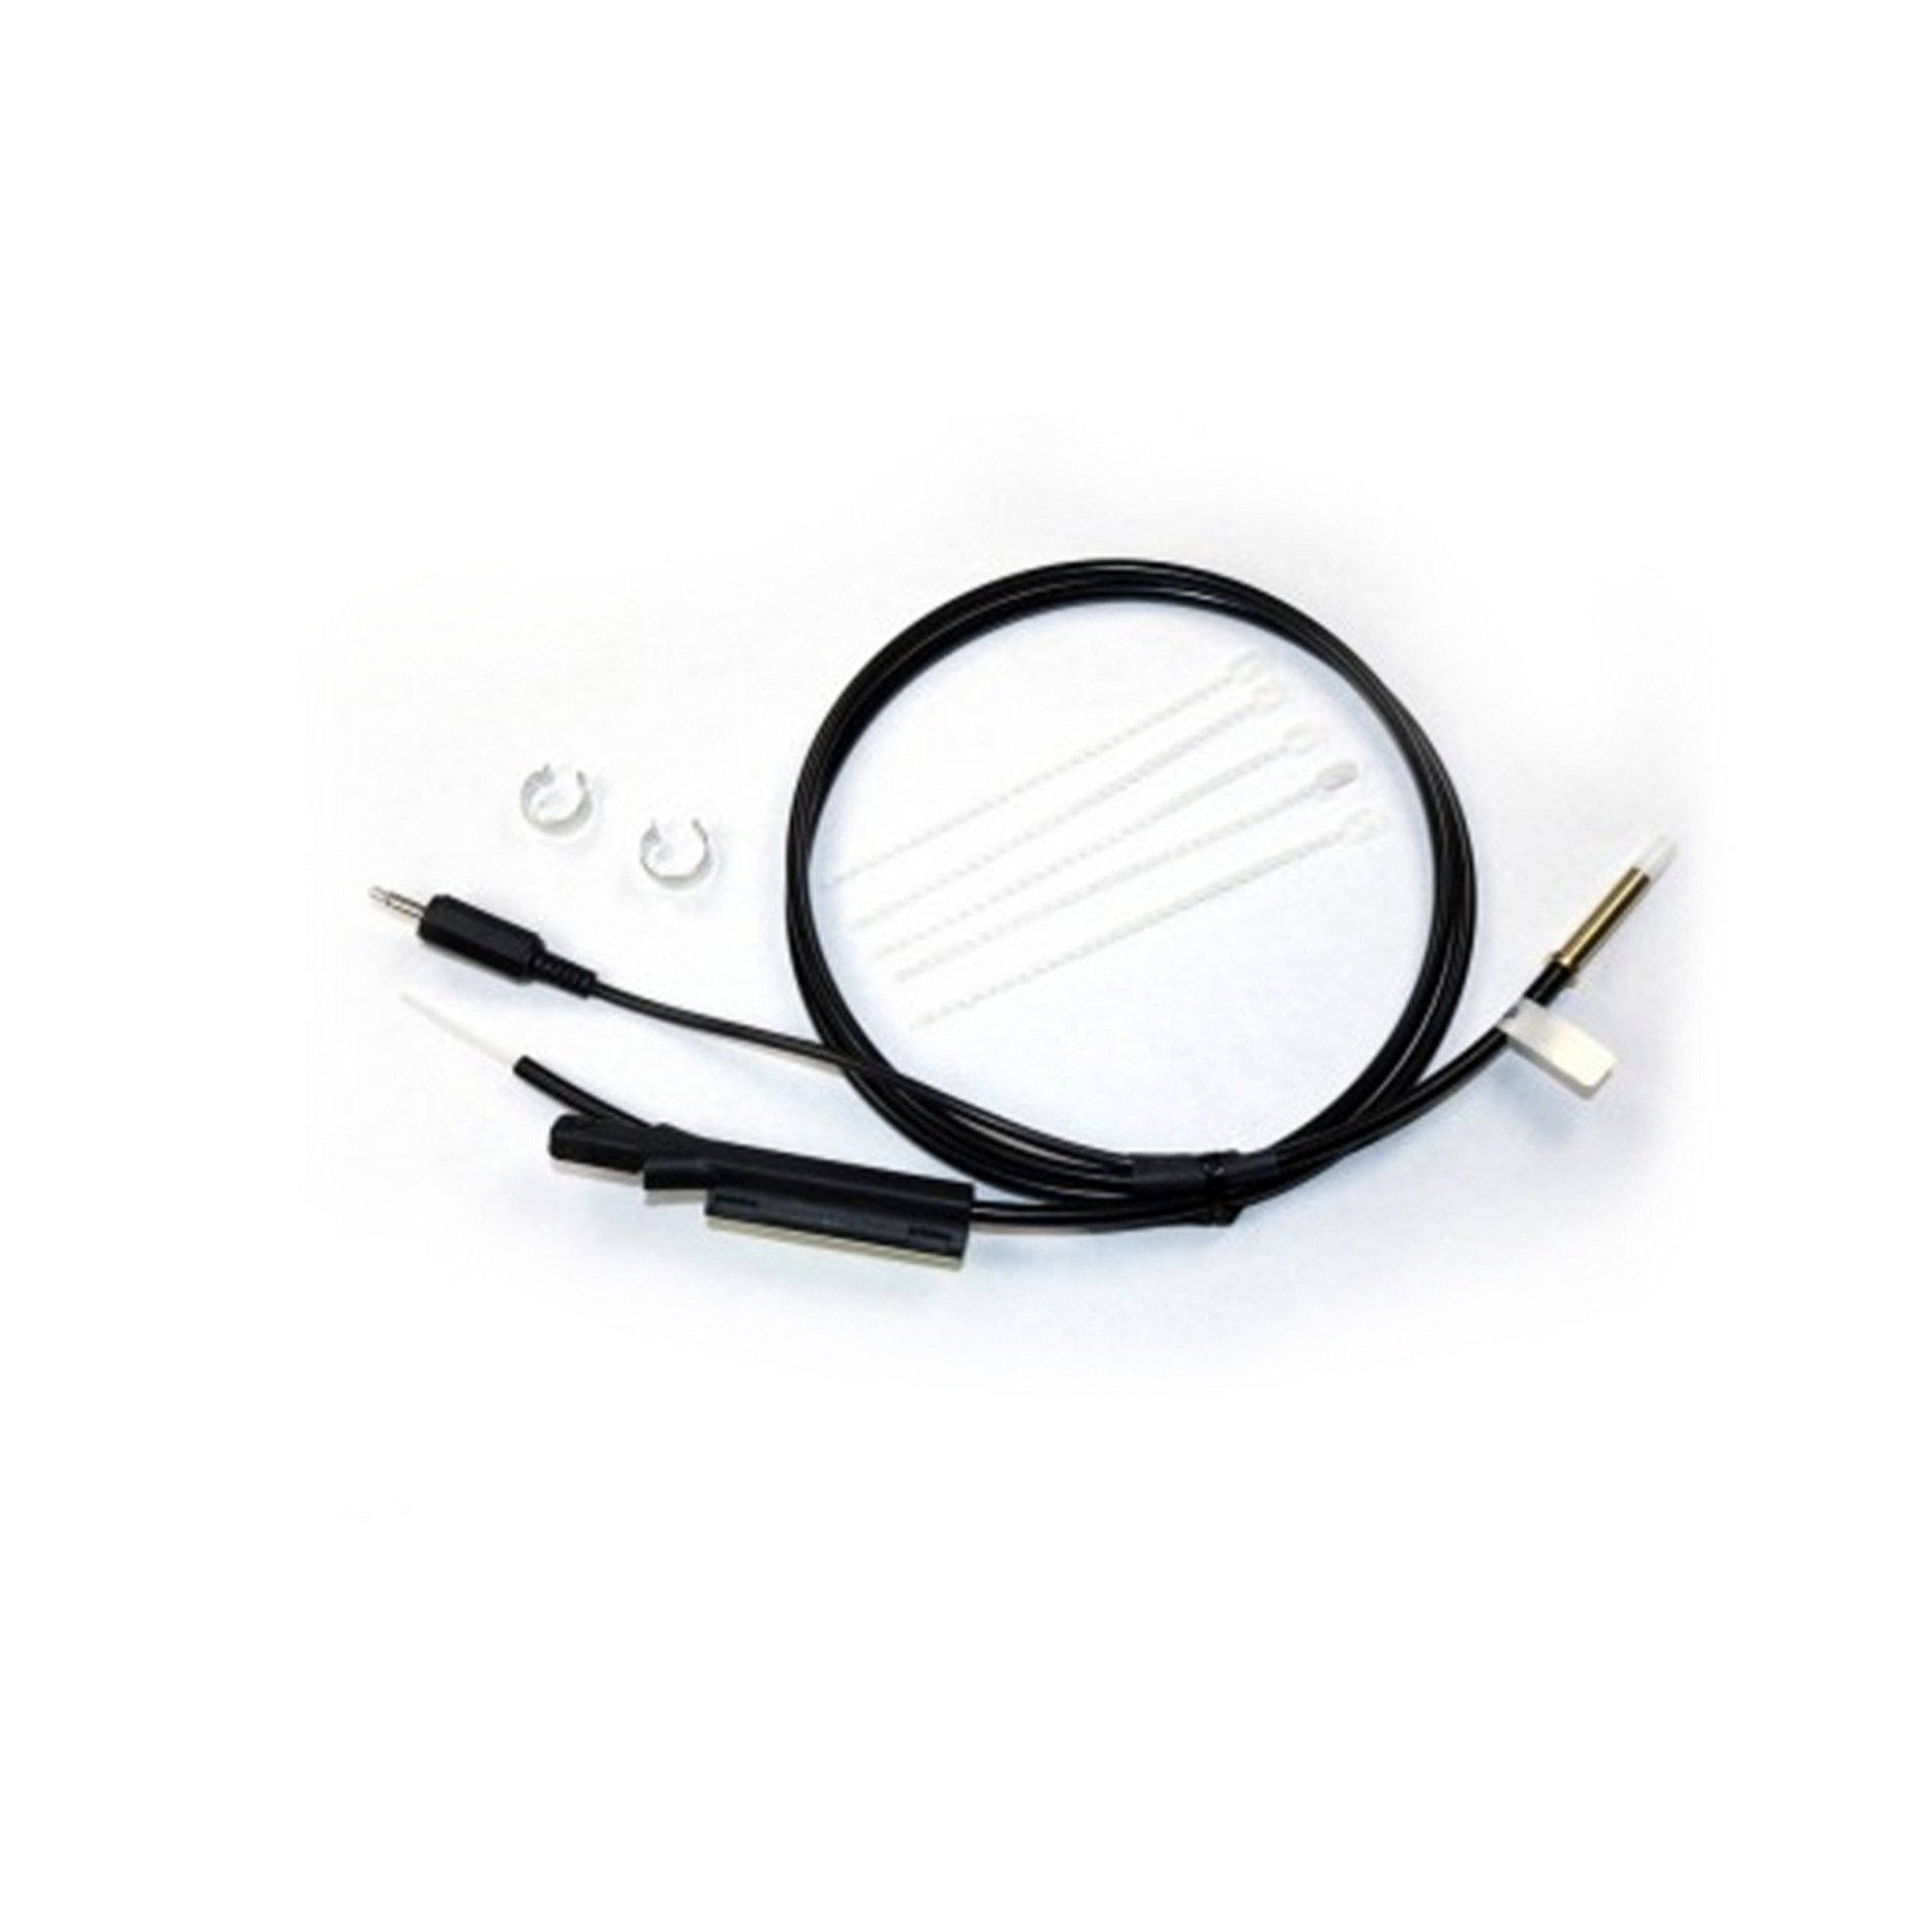 Hakko Products_ B3564 Tube Assembly S 1.2mm – 1.6mm_ Soldering Accessories_ Hakko Products